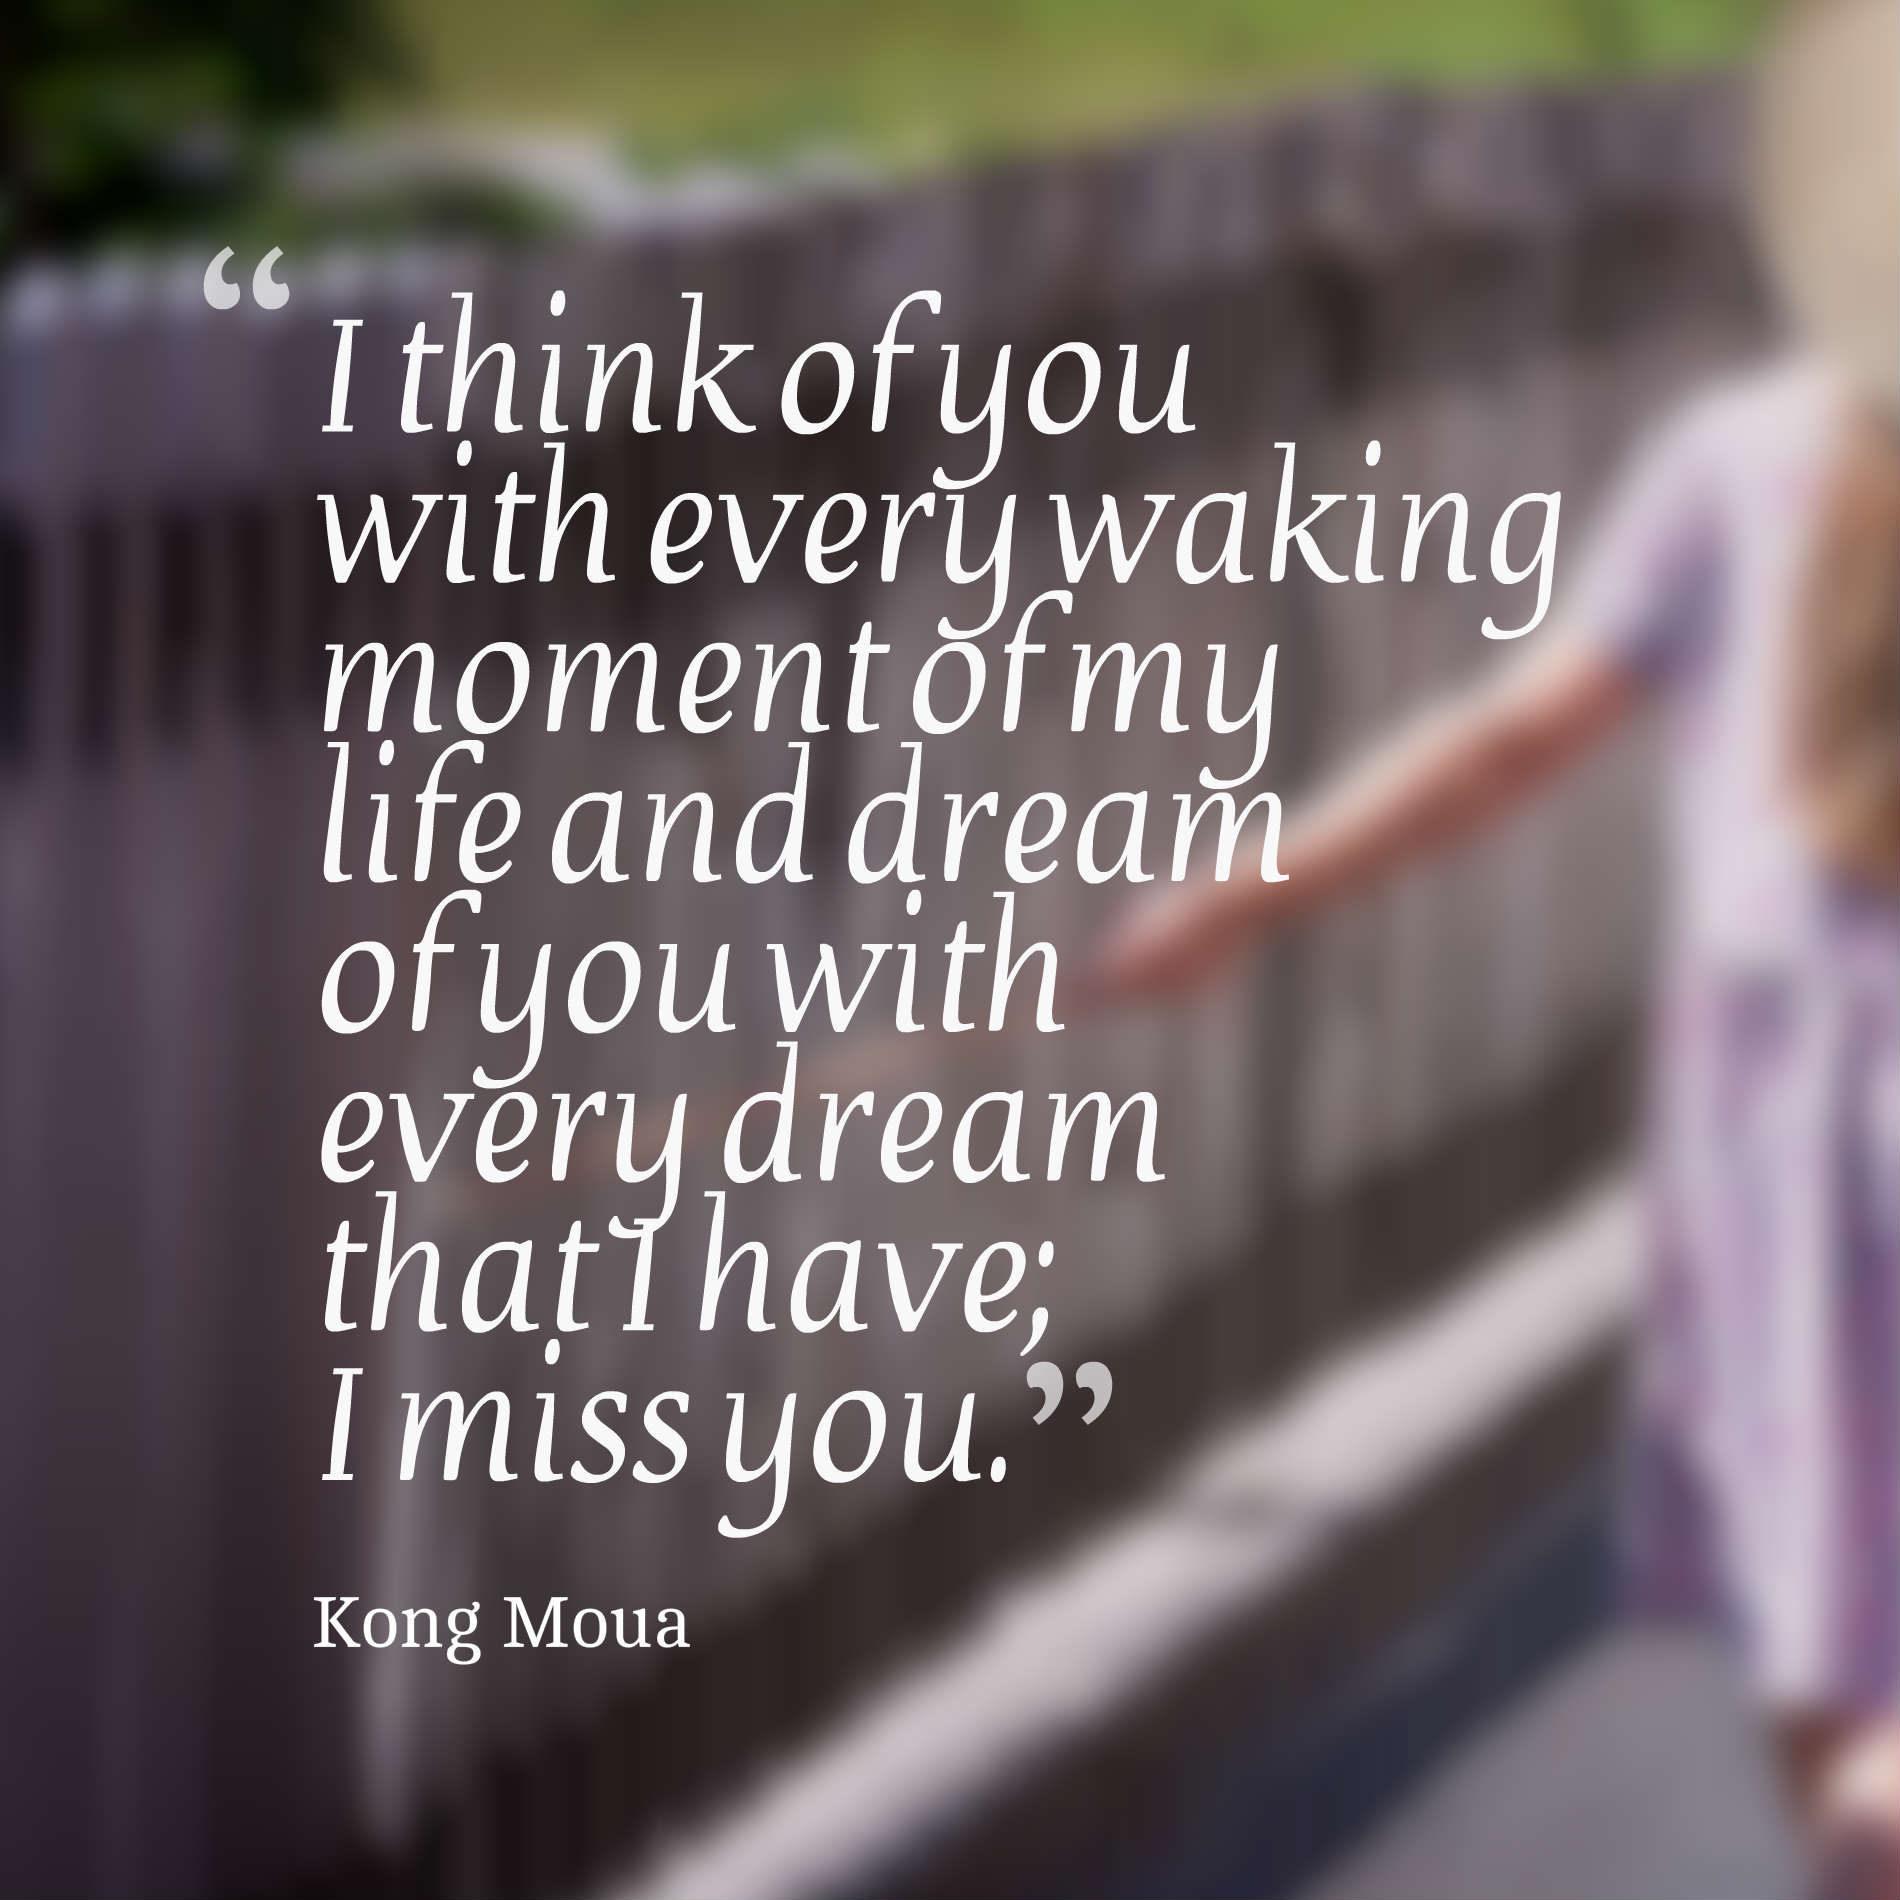 I think of you with every waking moment of my life and dream of you with every dream that I have; I miss you.